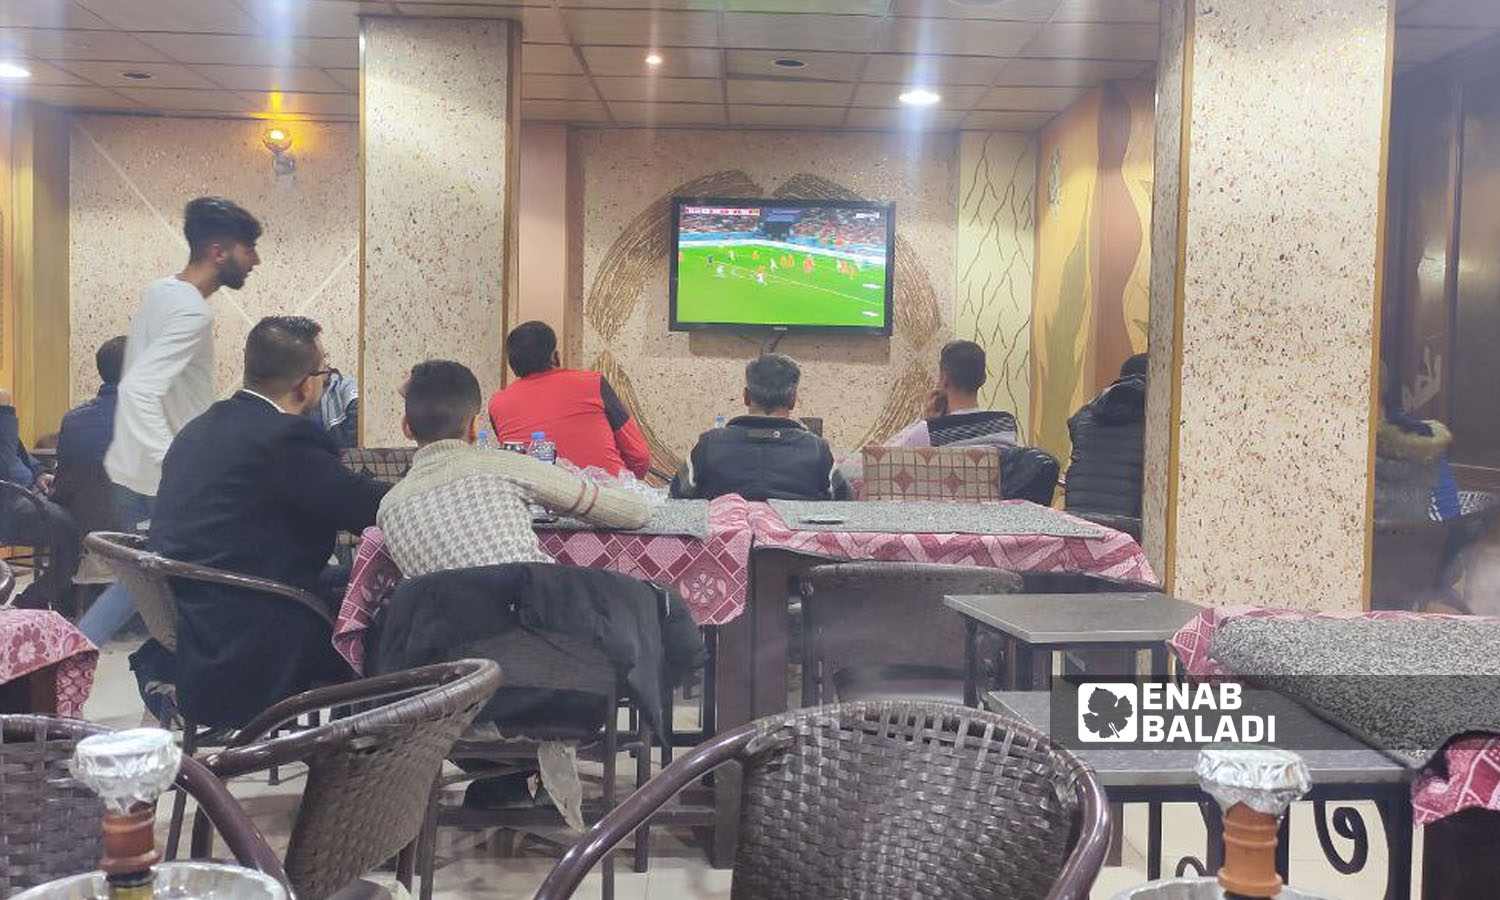 A group of cafe-goers in al-Hasakah city while watching a FIFA World Cup match - 2 December 2022 (Enab Baladi/Majd al-Salem)